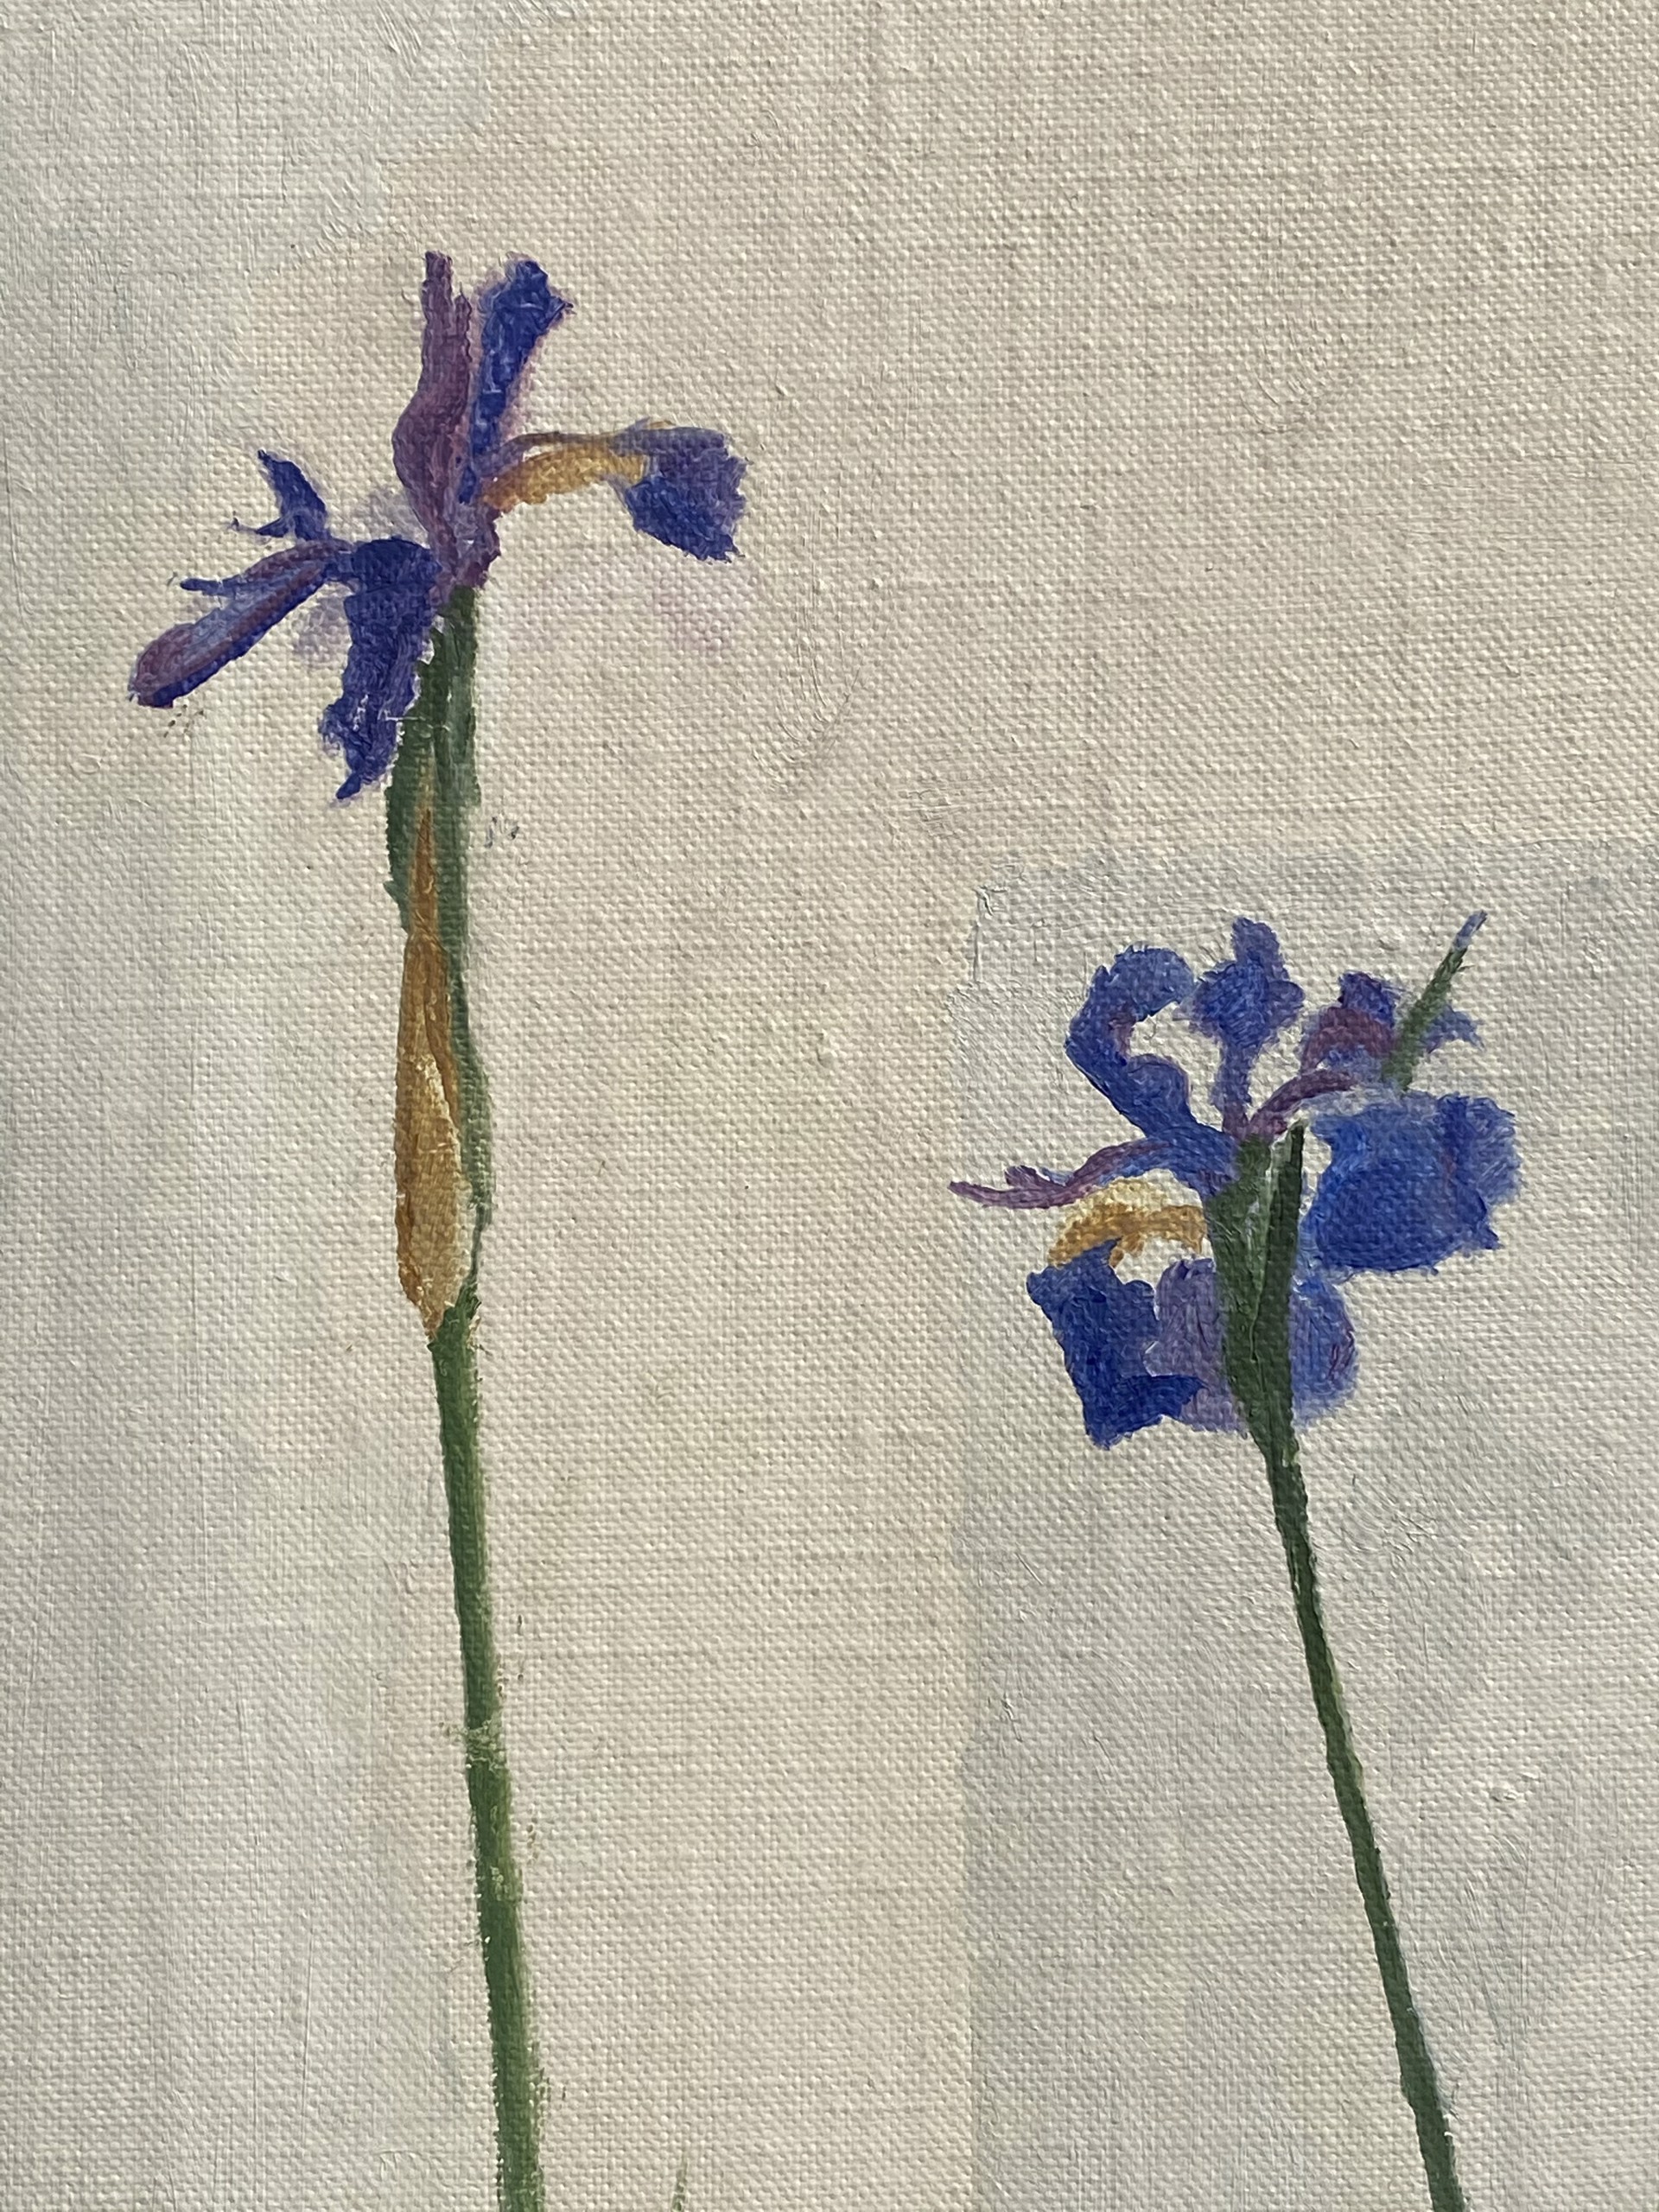 Charlotte Verity's oil painting of three European Iris blossoms on stems, arranged parallel